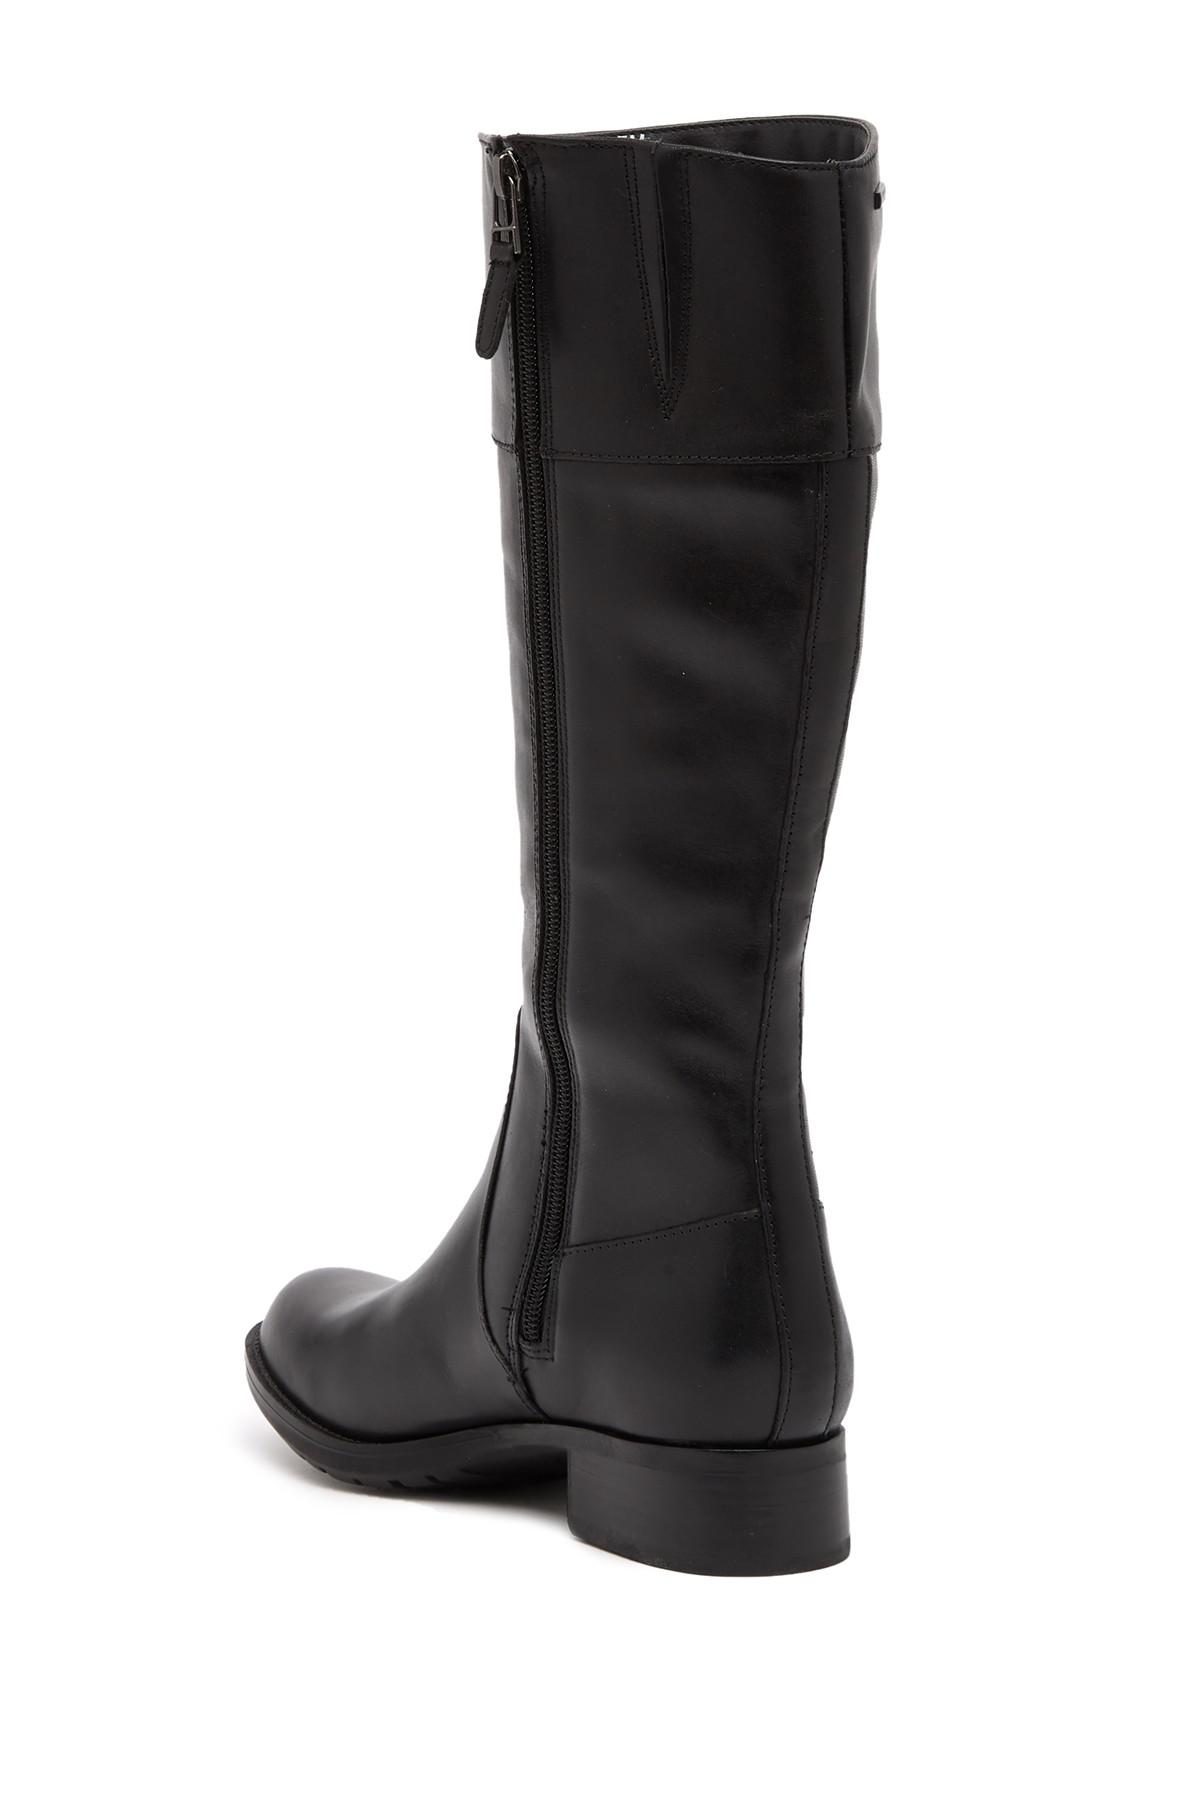 rockport black leather boots